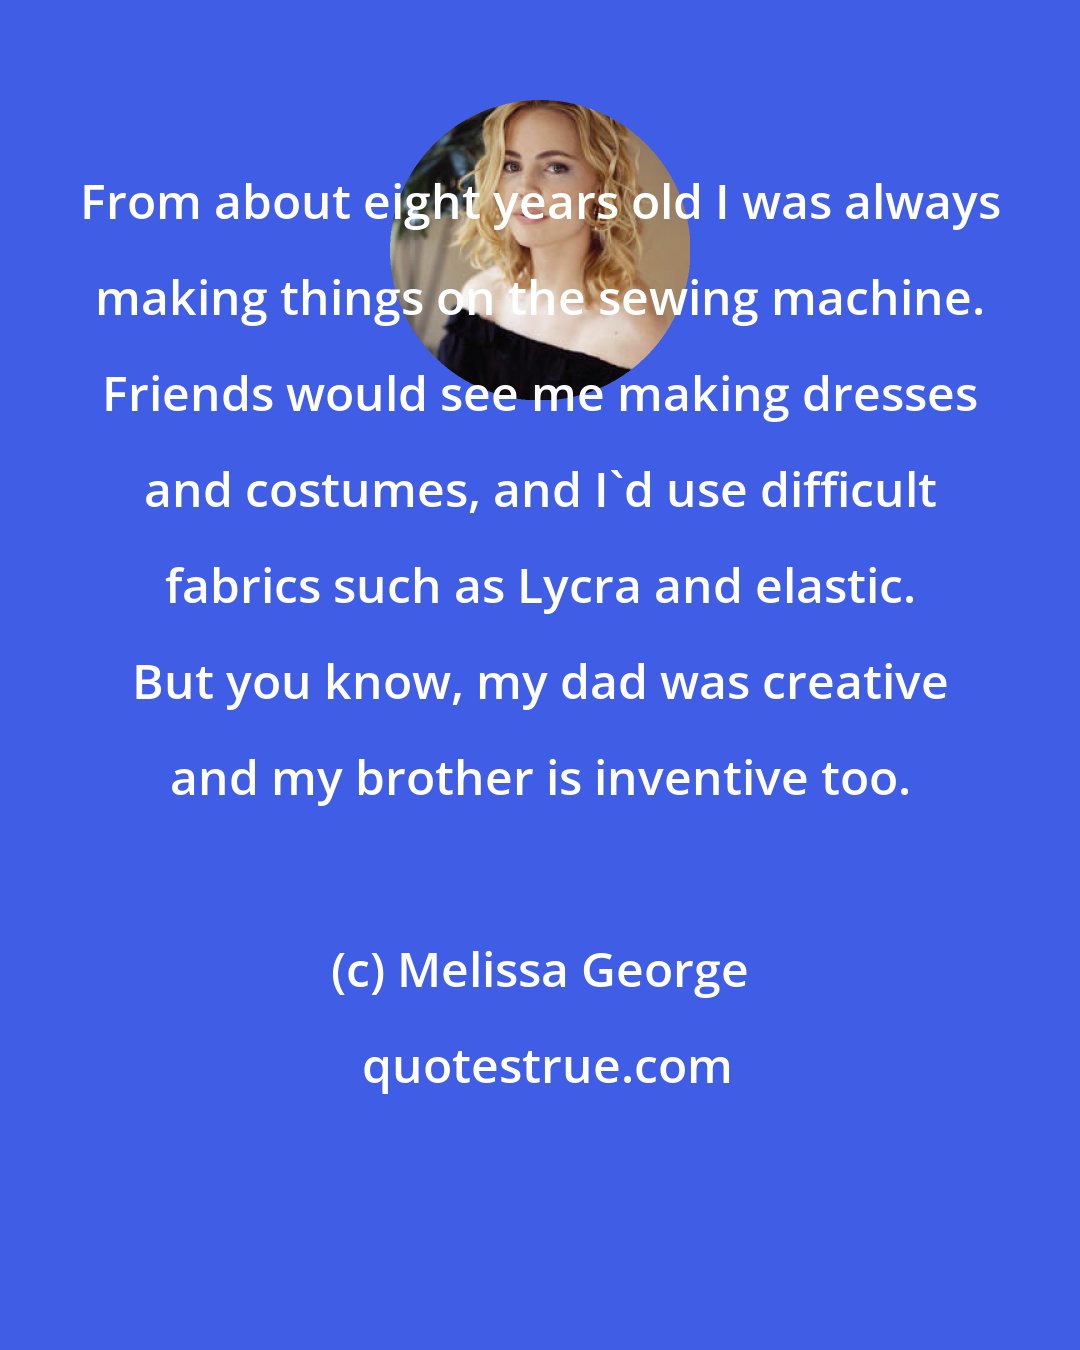 Melissa George: From about eight years old I was always making things on the sewing machine. Friends would see me making dresses and costumes, and I'd use difficult fabrics such as Lycra and elastic. But you know, my dad was creative and my brother is inventive too.